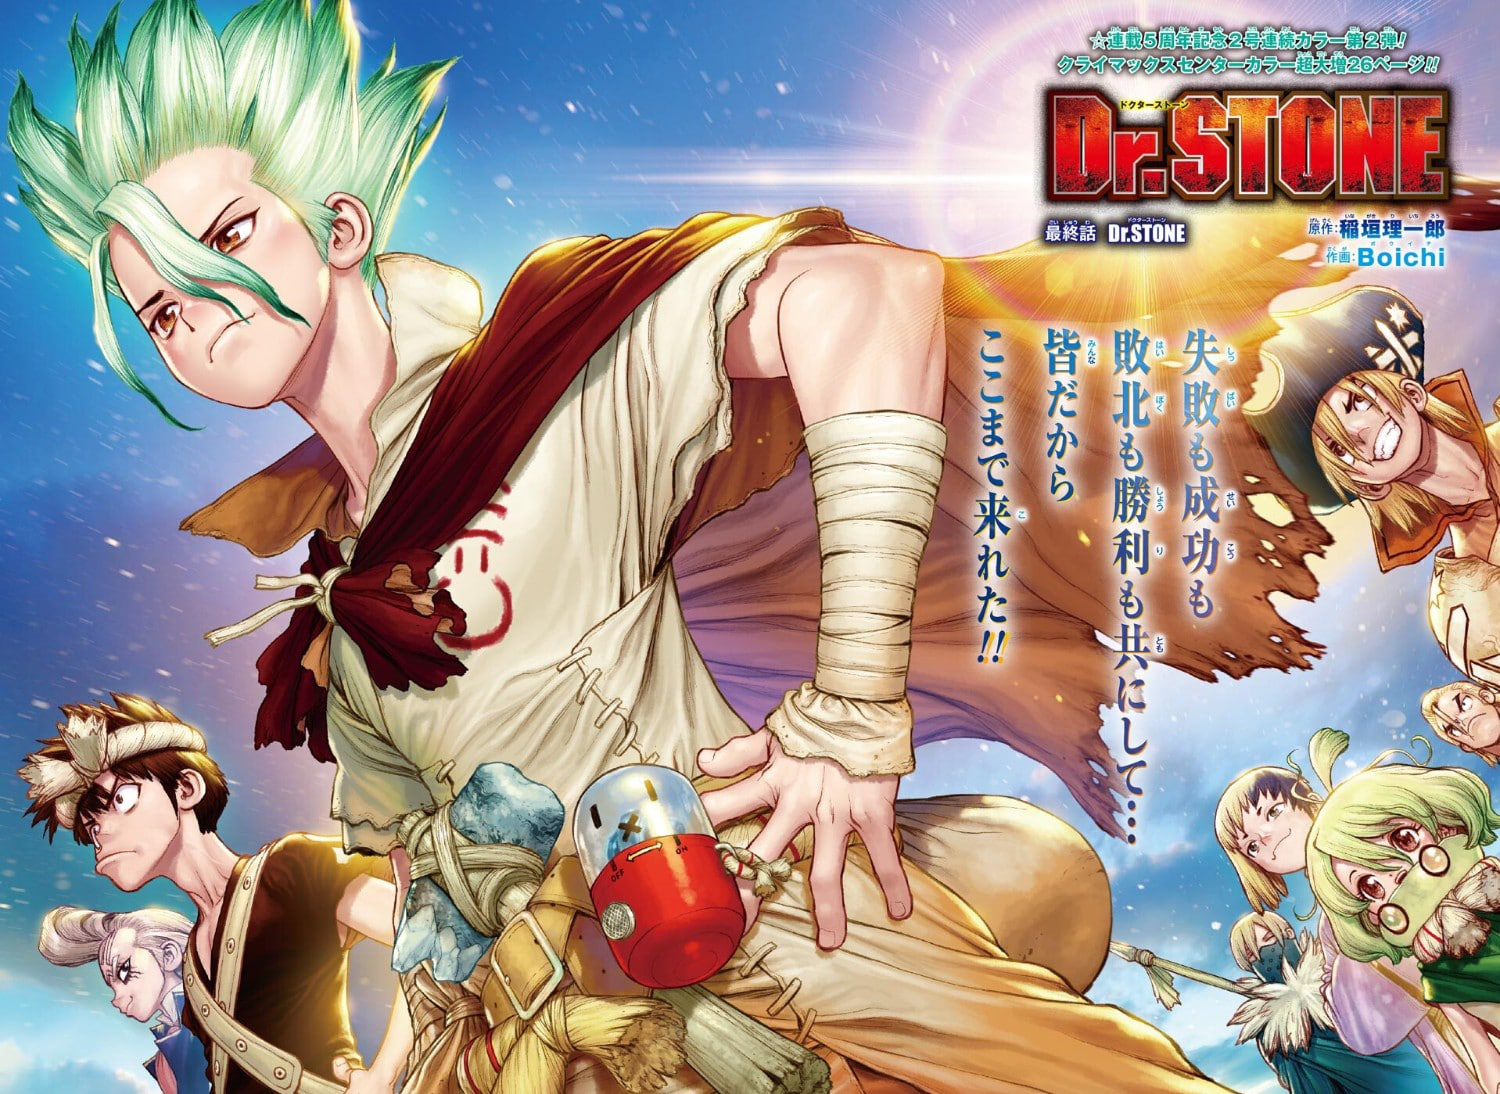 Dr Stone Season 3 Episode 4 Release Date And Time